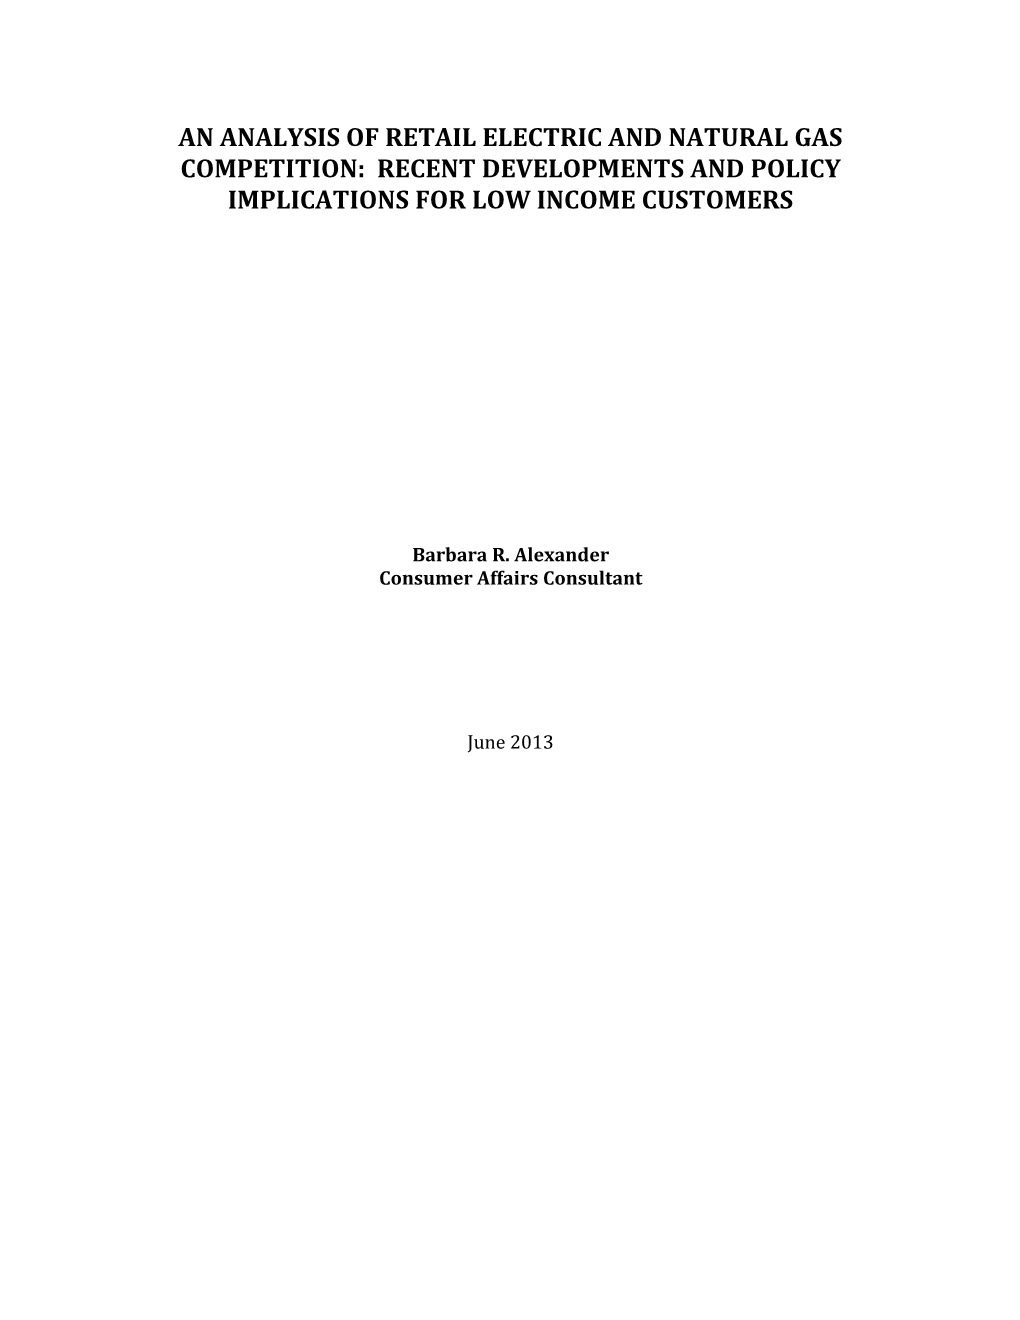 An Analysis of Retail Electric and Natural Gas Competition: Recent Developments and Policy